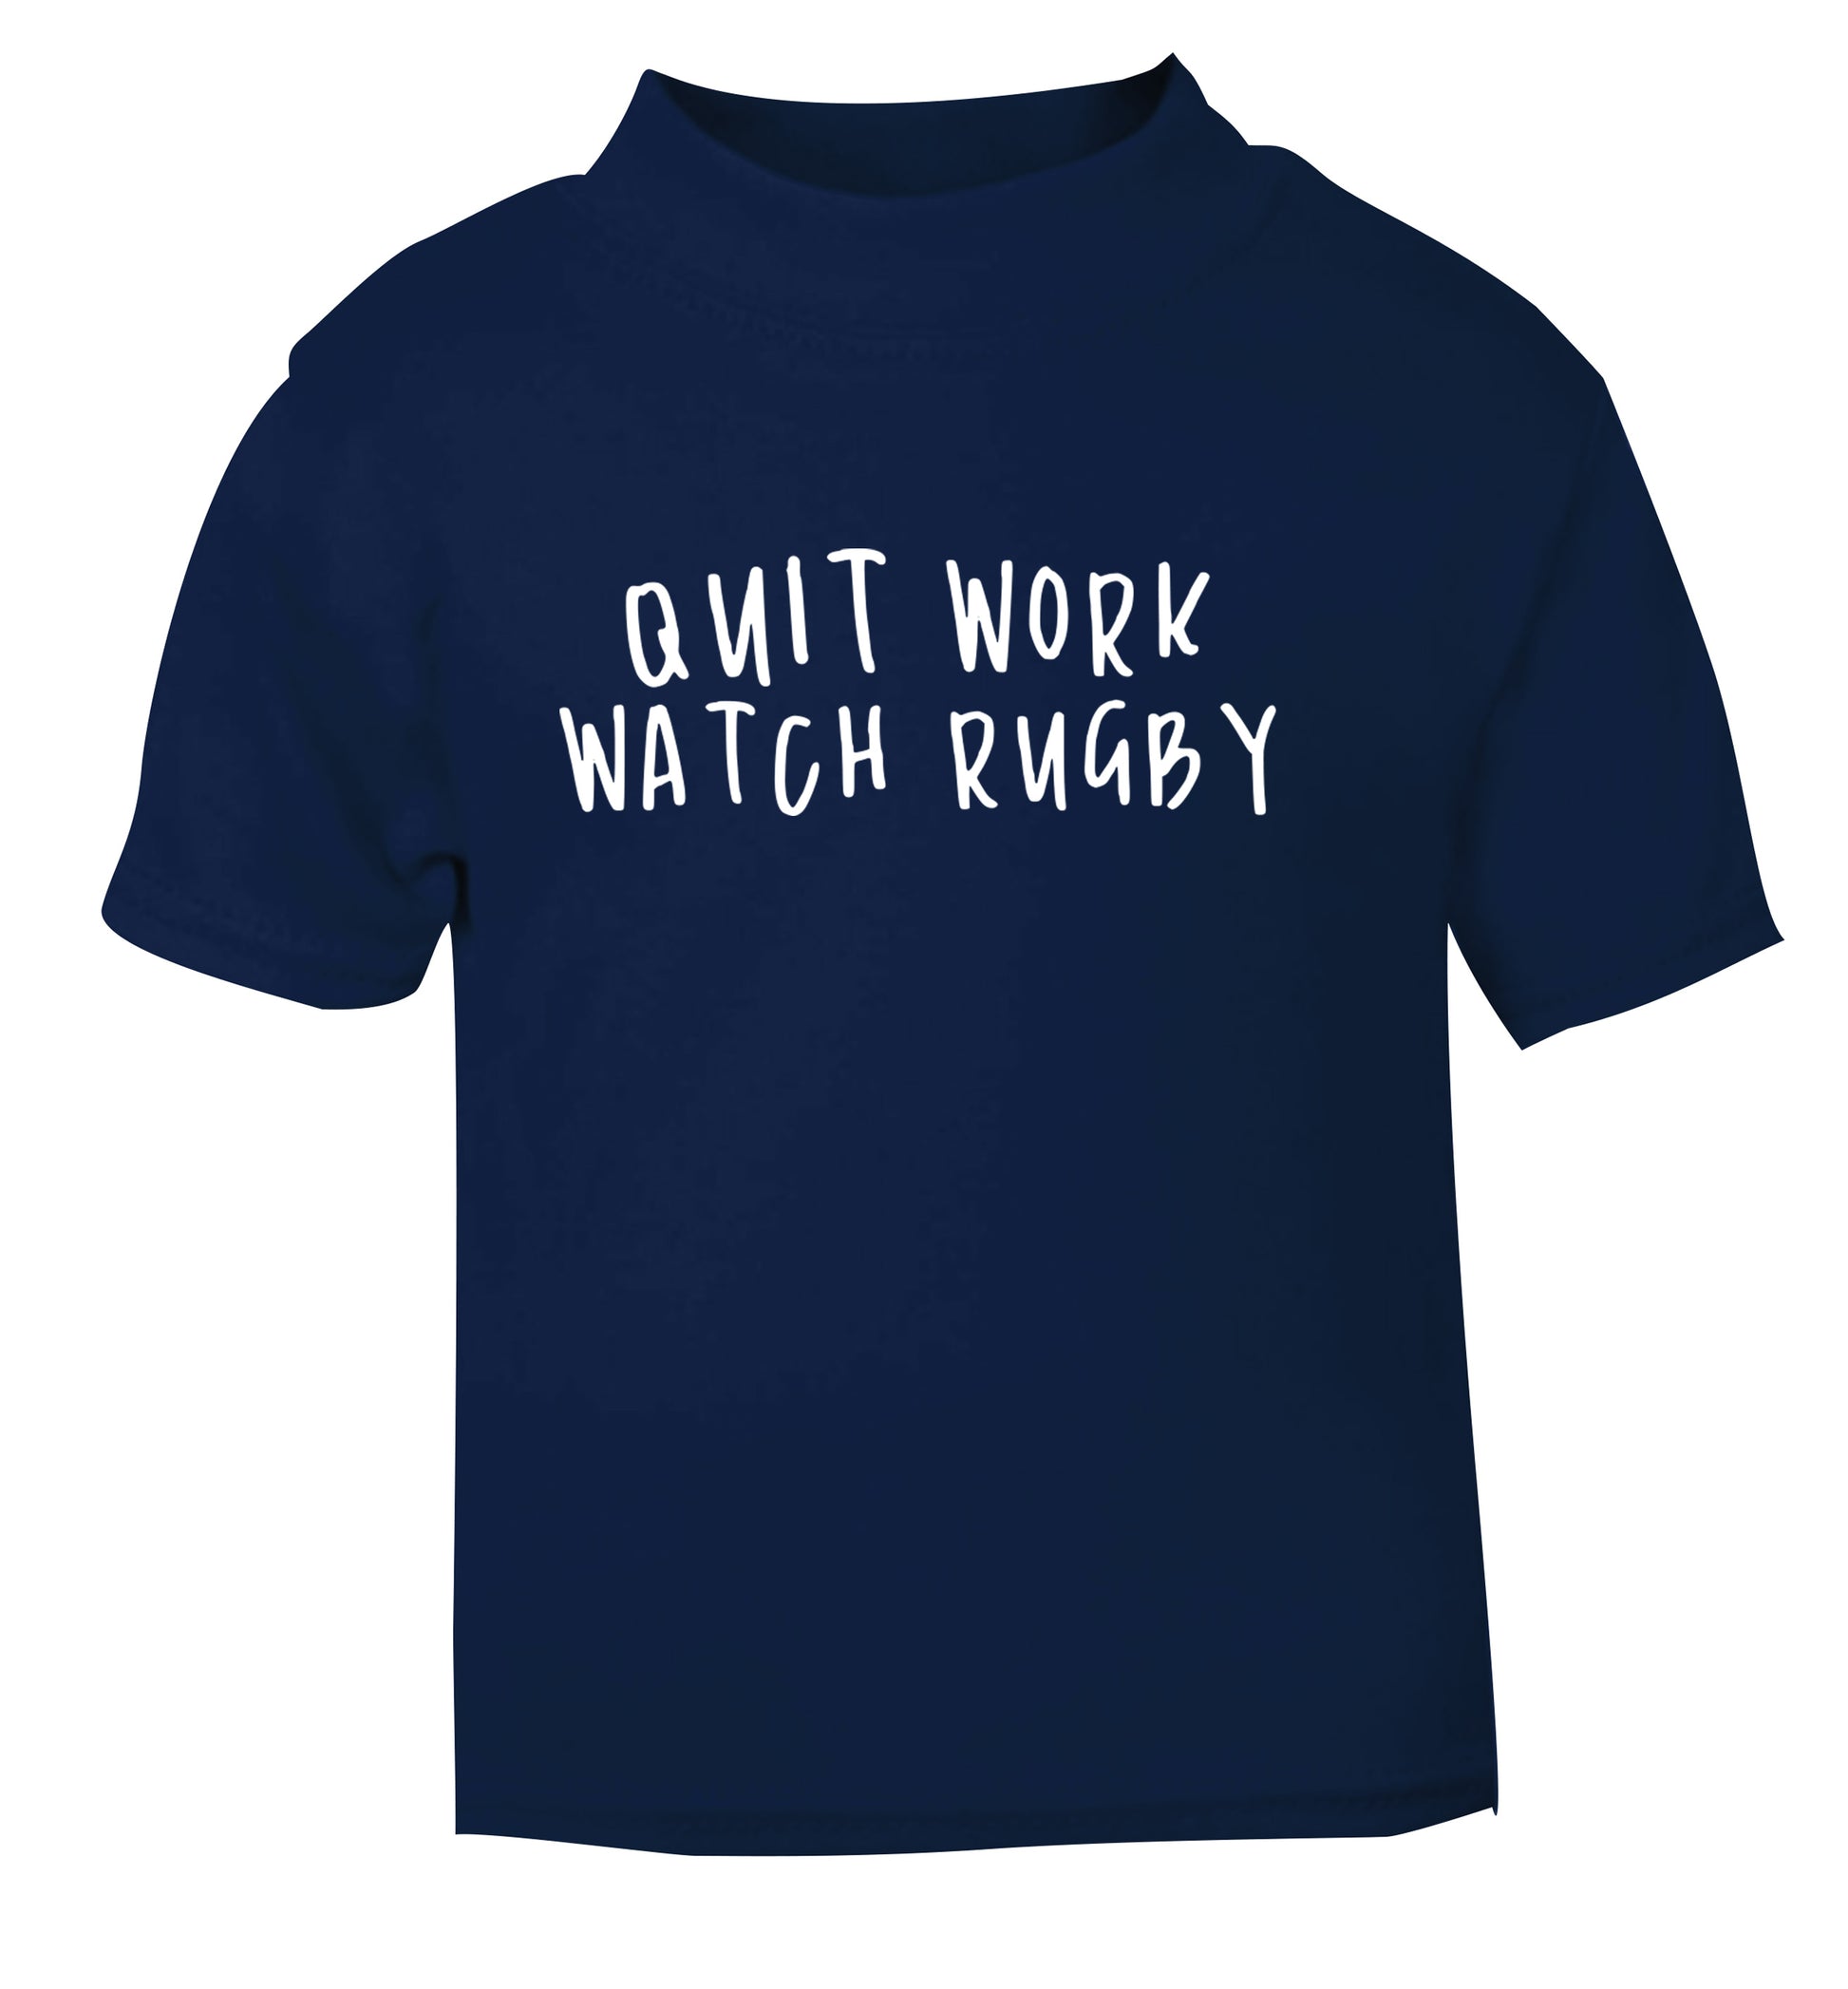 Quit work watch rugby navy Baby Toddler Tshirt 2 Years